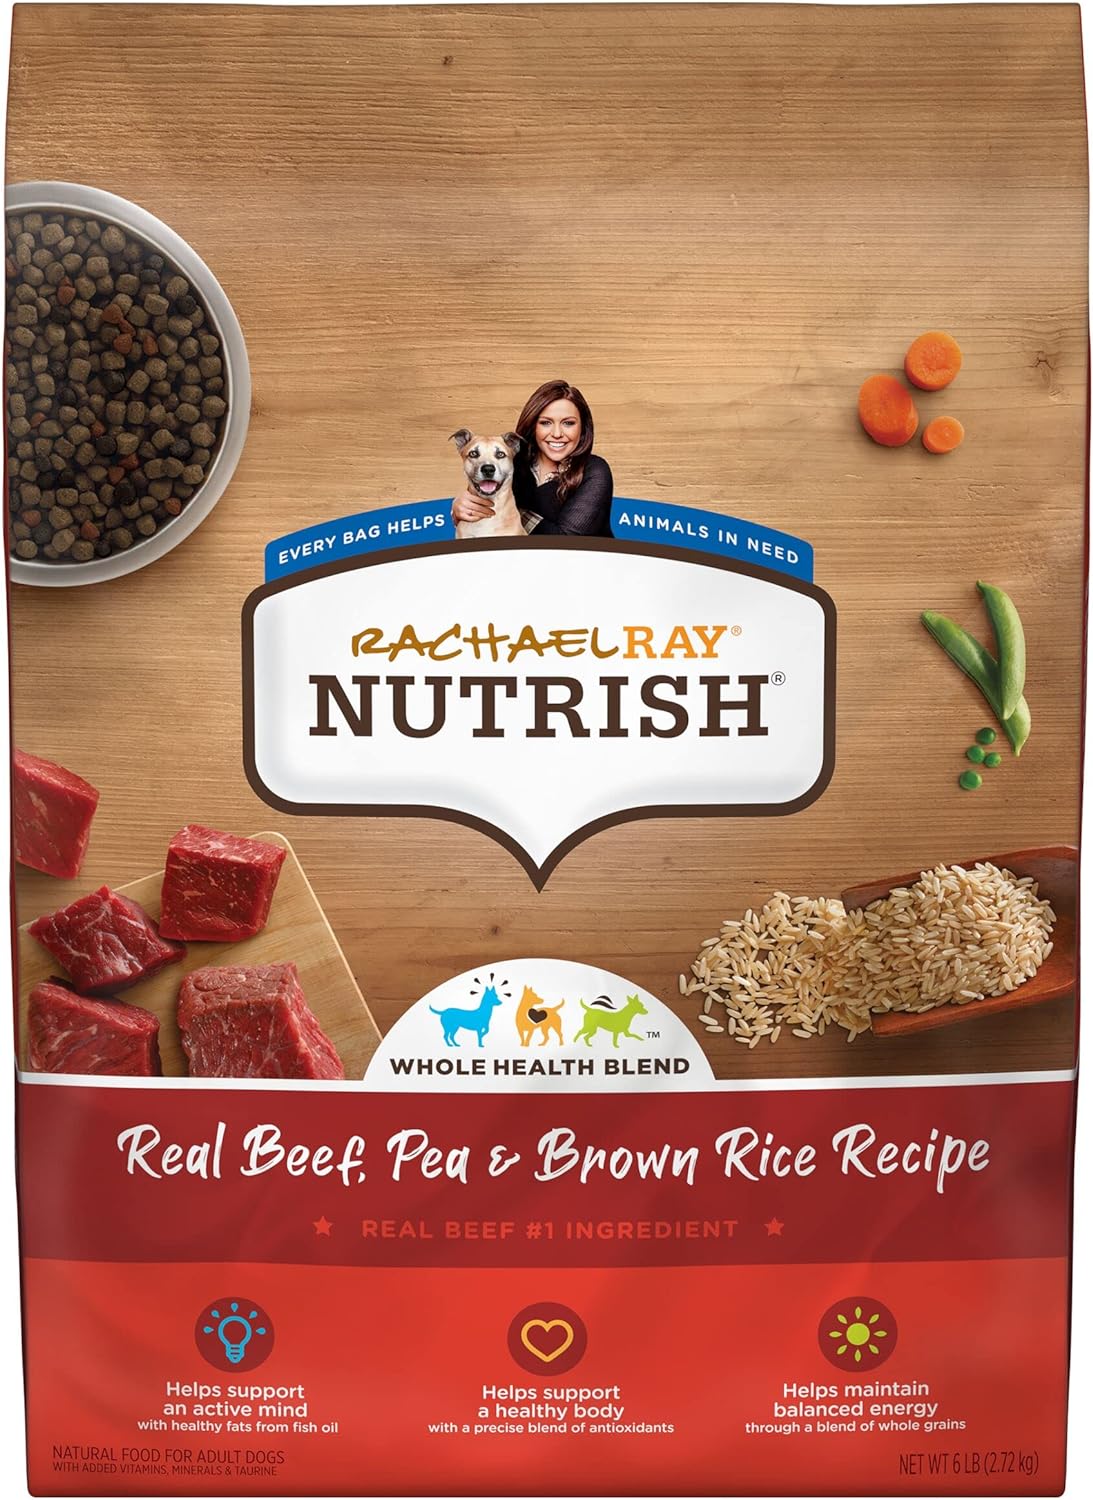 Rachael Ray Nutrish Premium Natural Dry Dog Food, Real Beef, Pea, & Brown Rice Recipe, 6 Pound Bag (Packaging May Vary)